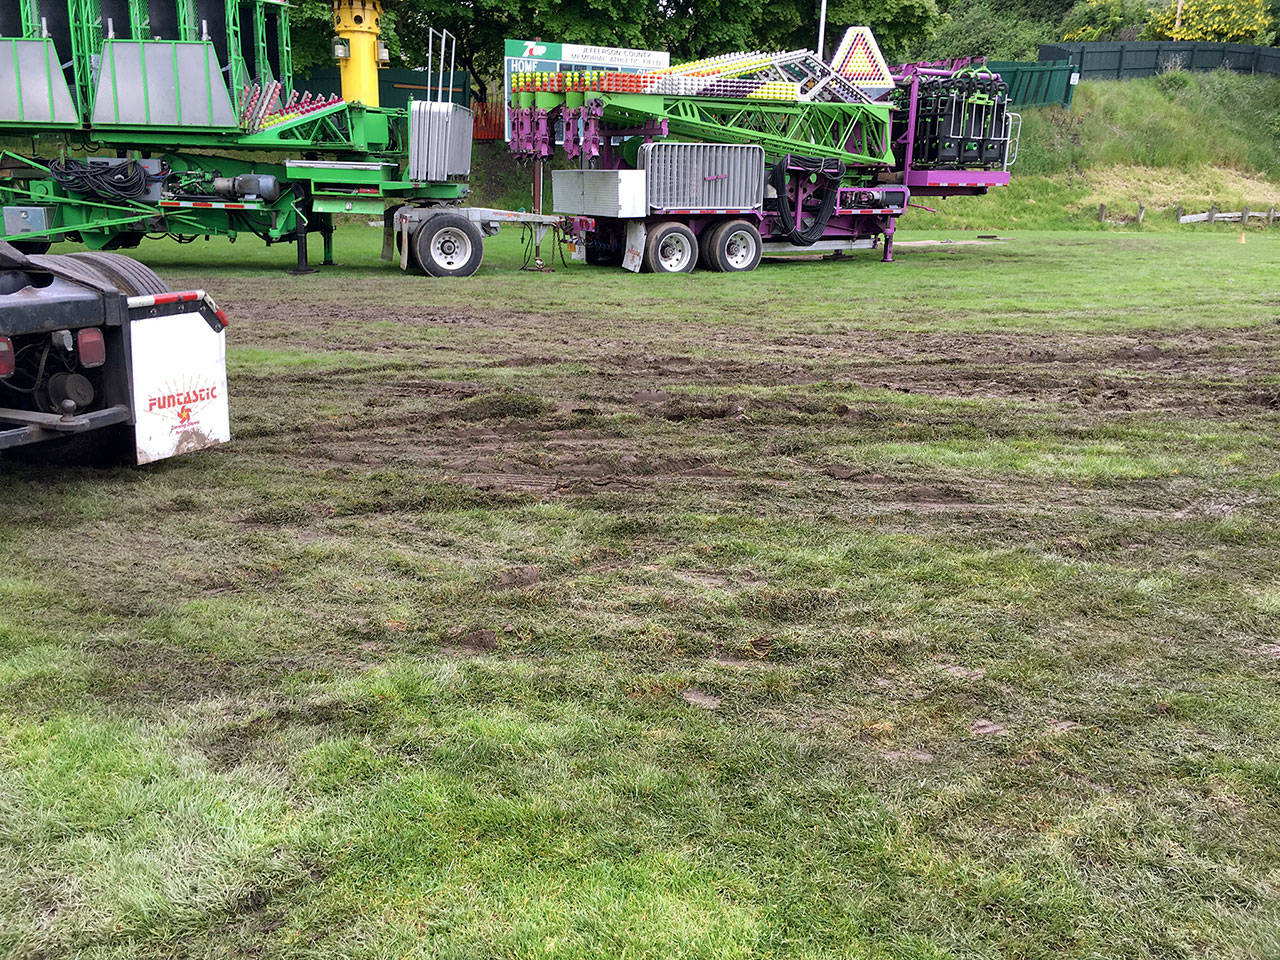 Jefferson County commissioners were disappointed in the heavy field damage caused by Rhody Fest’s Funtastic fund-raising carnival last May. It took two months to repair ruts, turf and damage to the irrigation system. Although the carnival paid $5,000 in damage deposits, county officials said it didn’t cover the true cost of the repairs and the displacement of other programs that were scheduled to use the field. (Jefferson County).